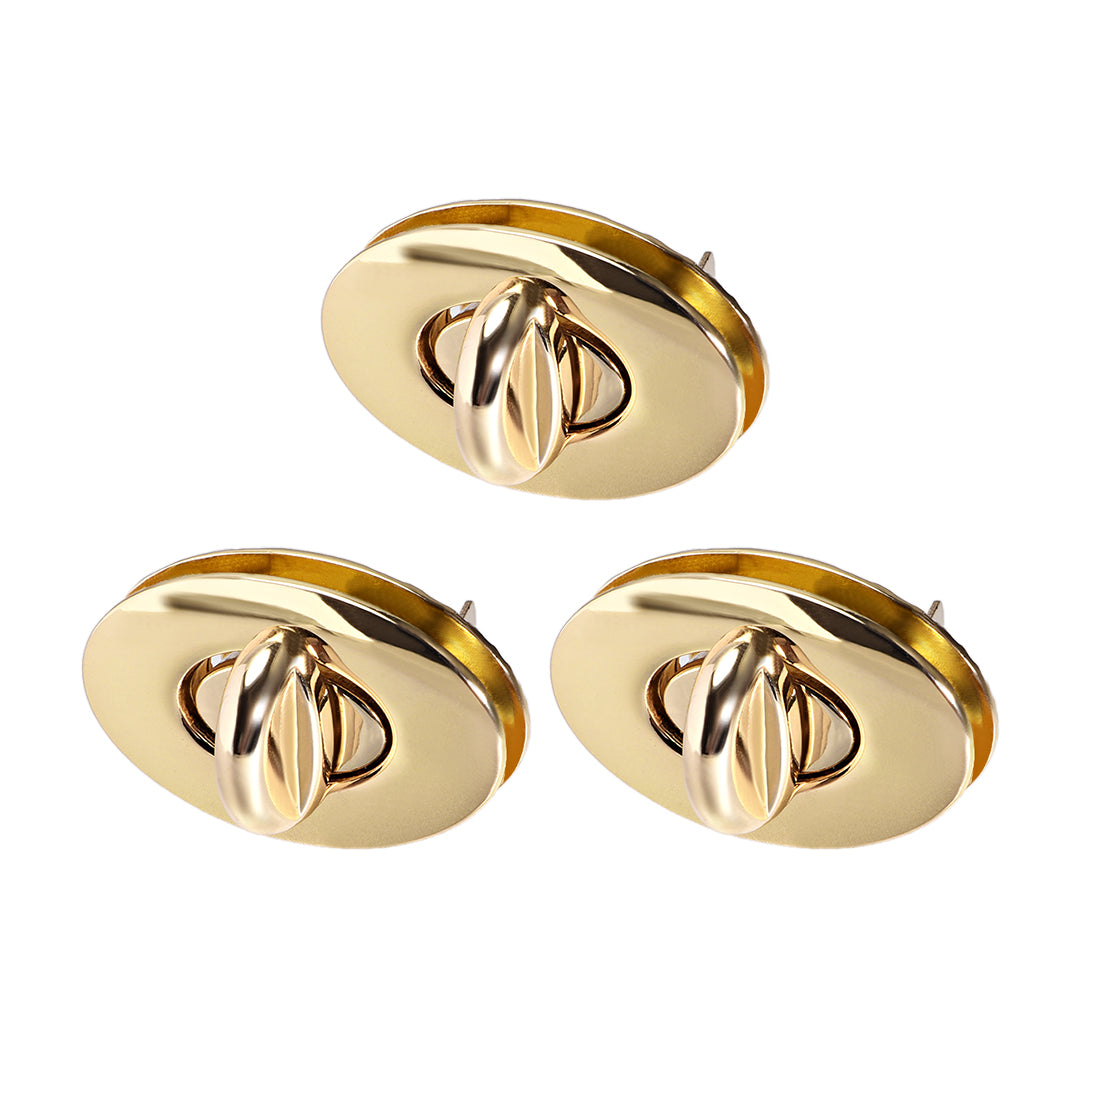 uxcell Uxcell 3 Sets Oval Purses Twist Lock 37mm x 23mm Clutches Closures for DIY Bag Making - Light Gold